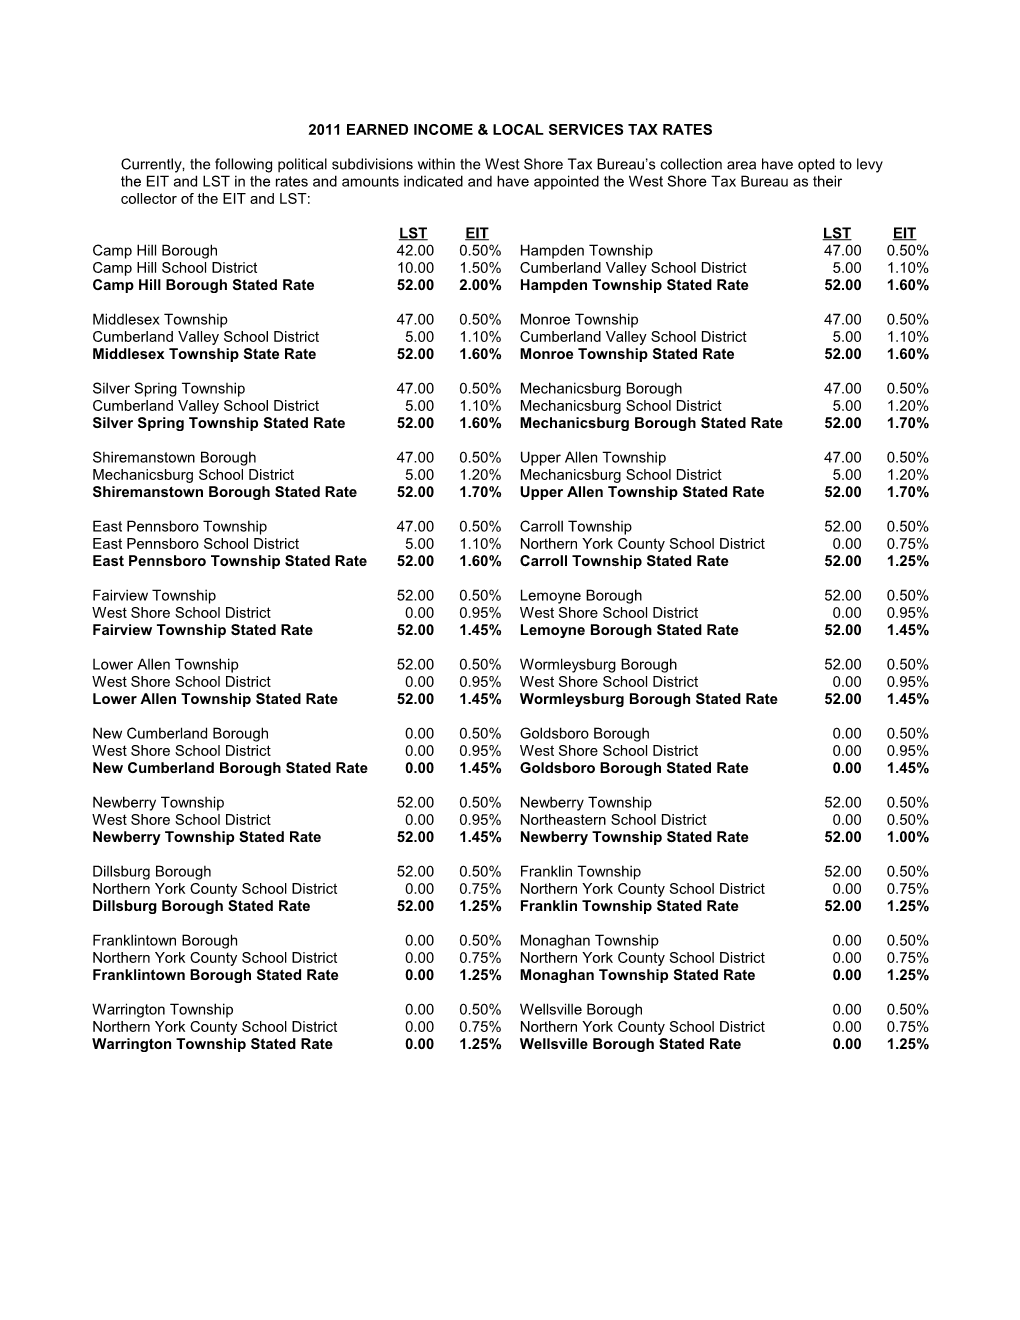 2011 Earned Income & Local Services Tax Rates